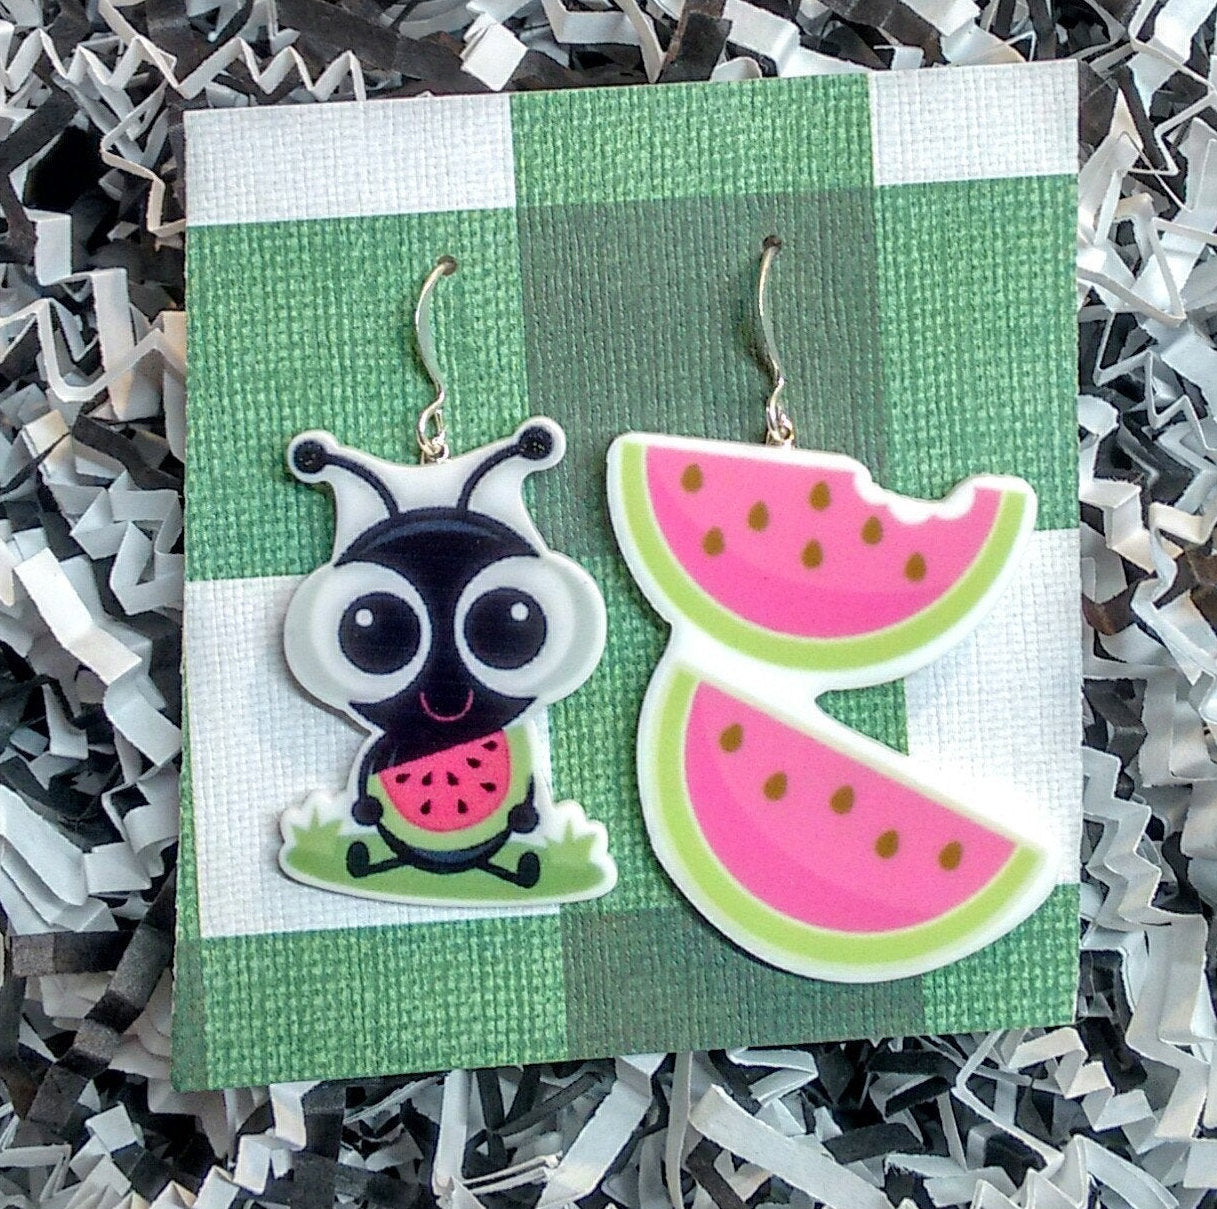 picnic ants, picnic ant earrings, picnic ant jewelry, watermelon earrings, food earrings, bug jewelry, gifts for her, gifts under 10,